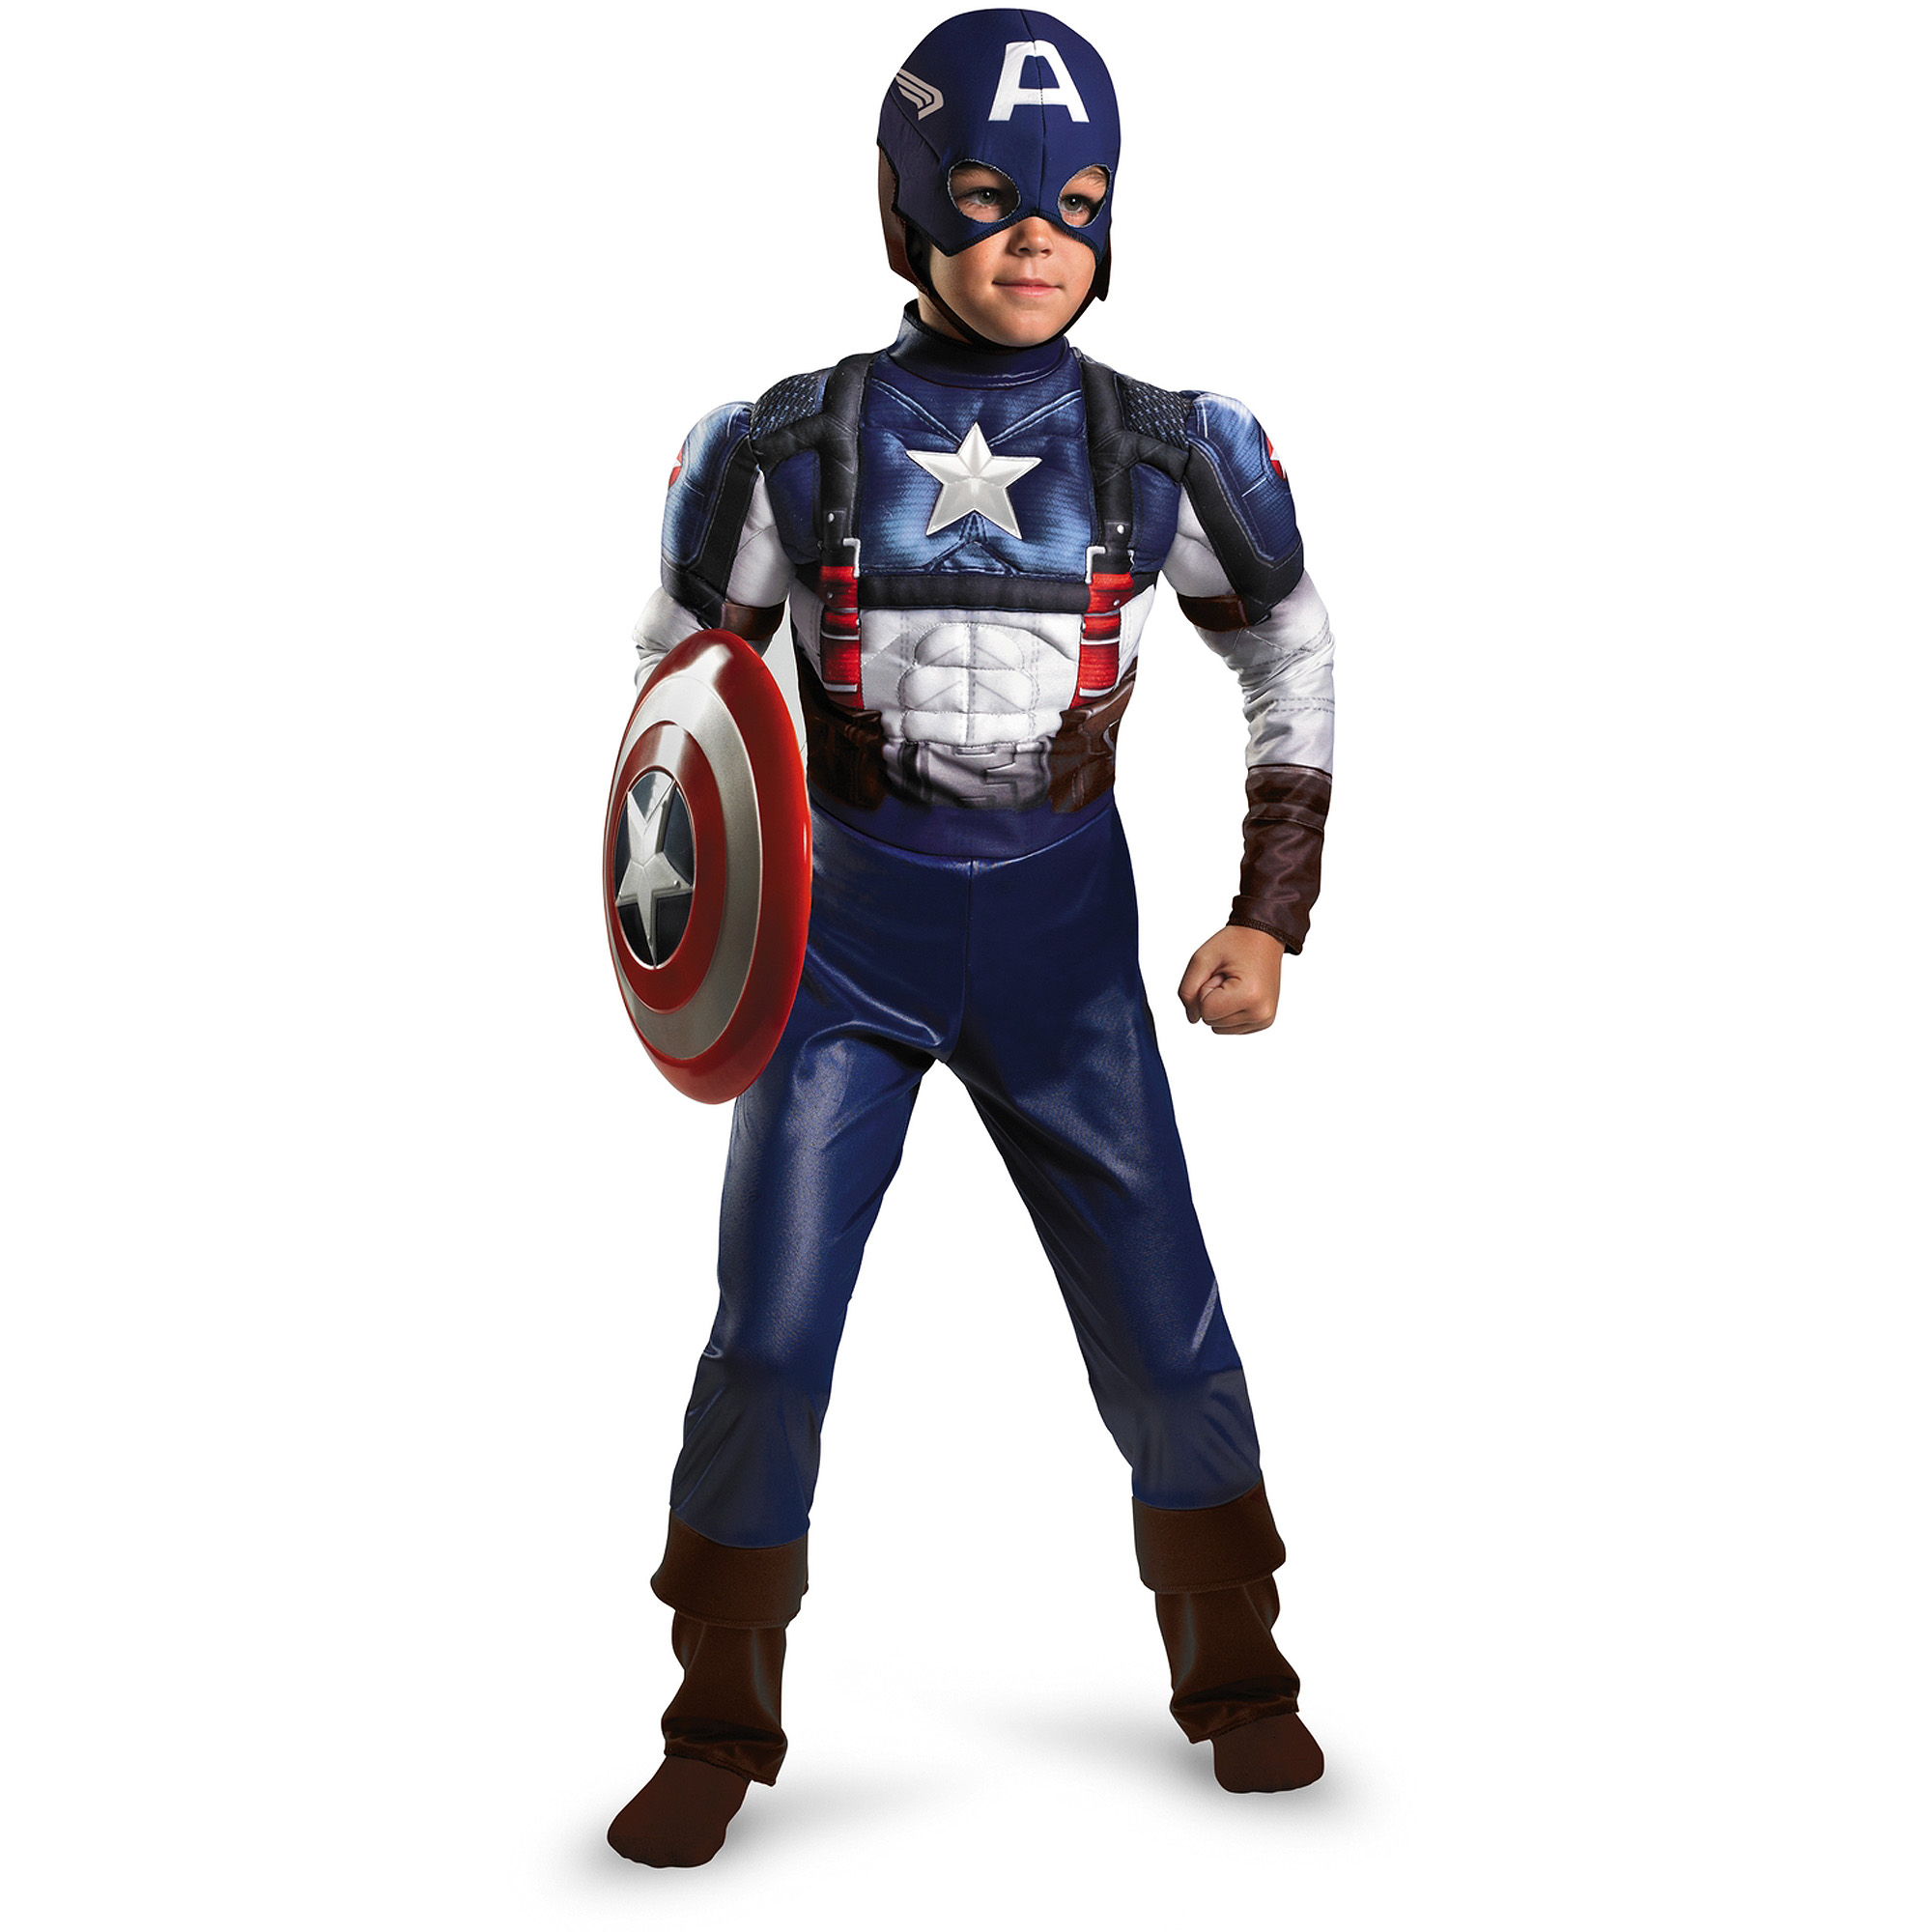 Captain America Muscle Child Halloween Costume - image 1 of 2